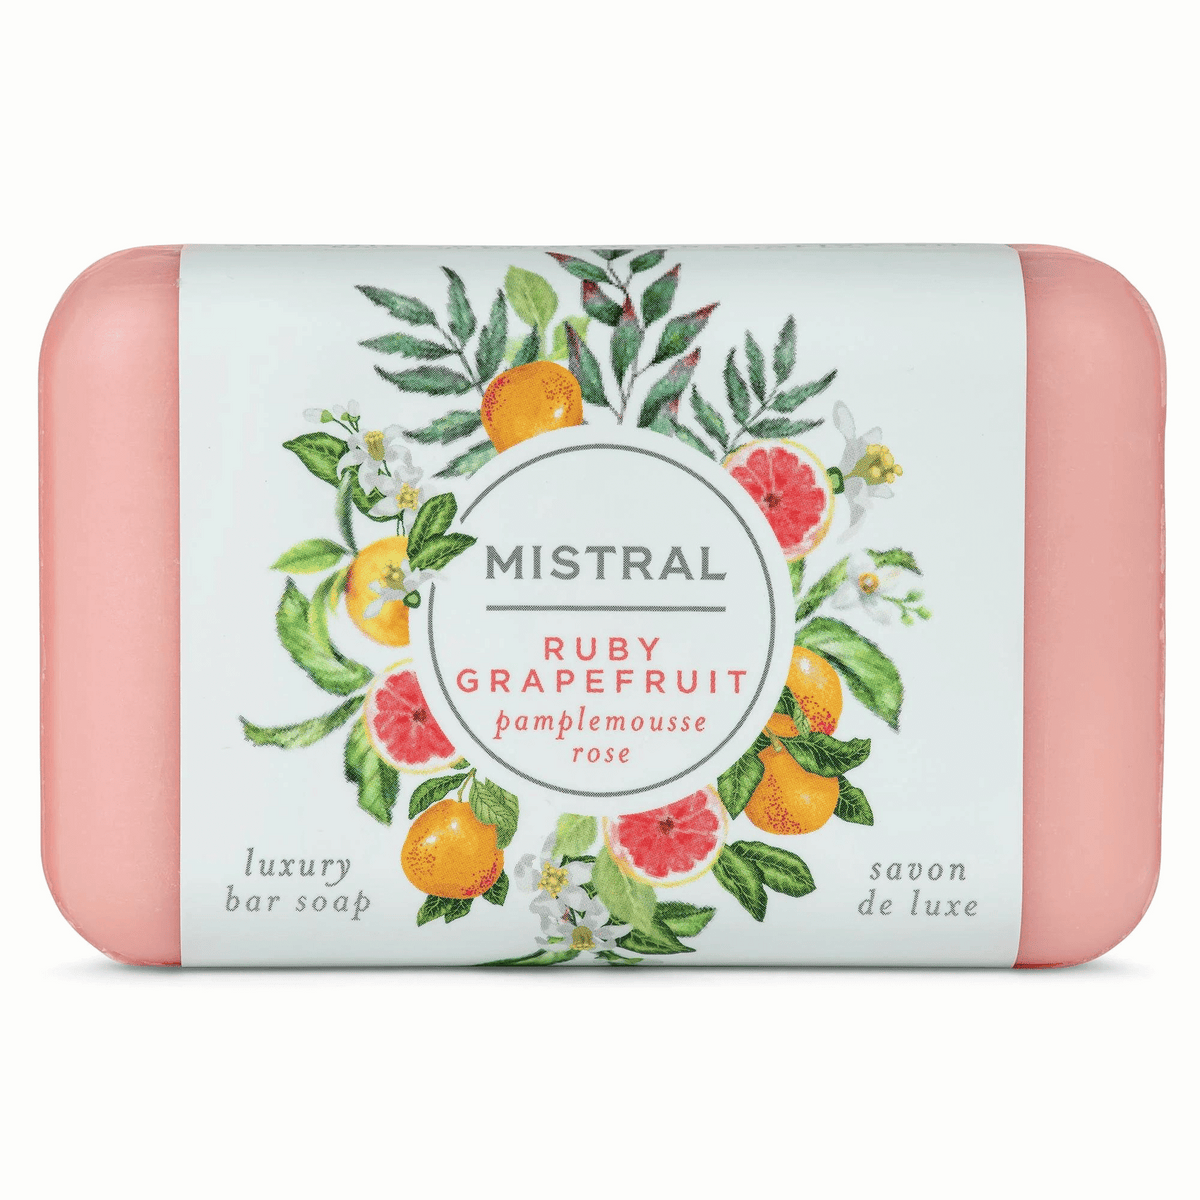 Primary Image of Ruby Grapefruit Classic Bar Soap